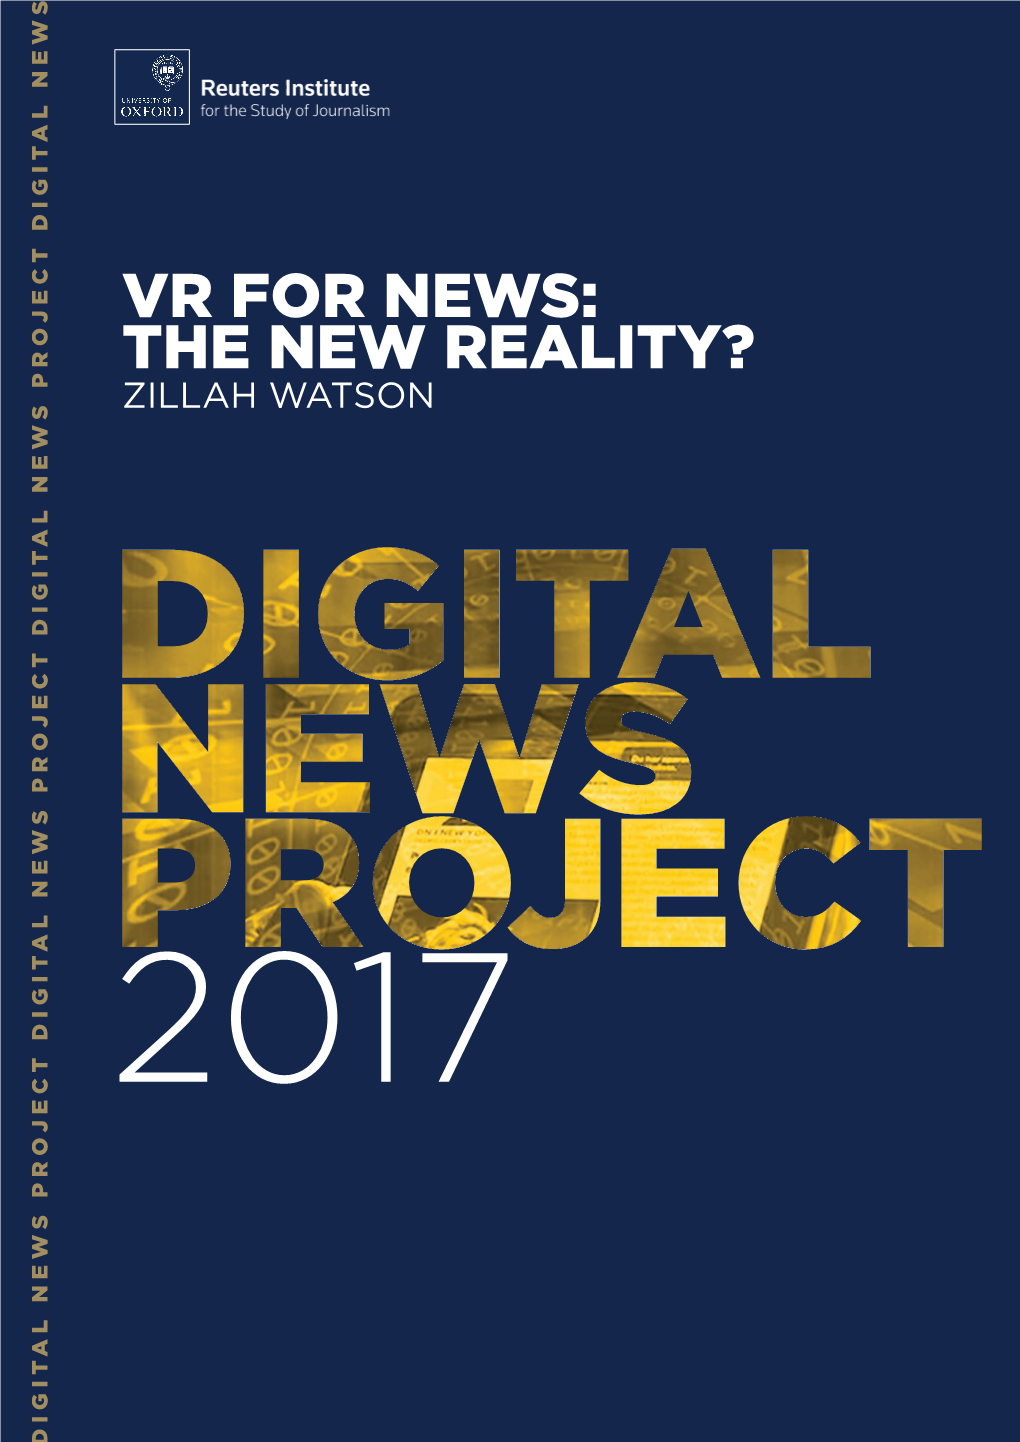 Vr for News: the New Reality? Zillah Watson